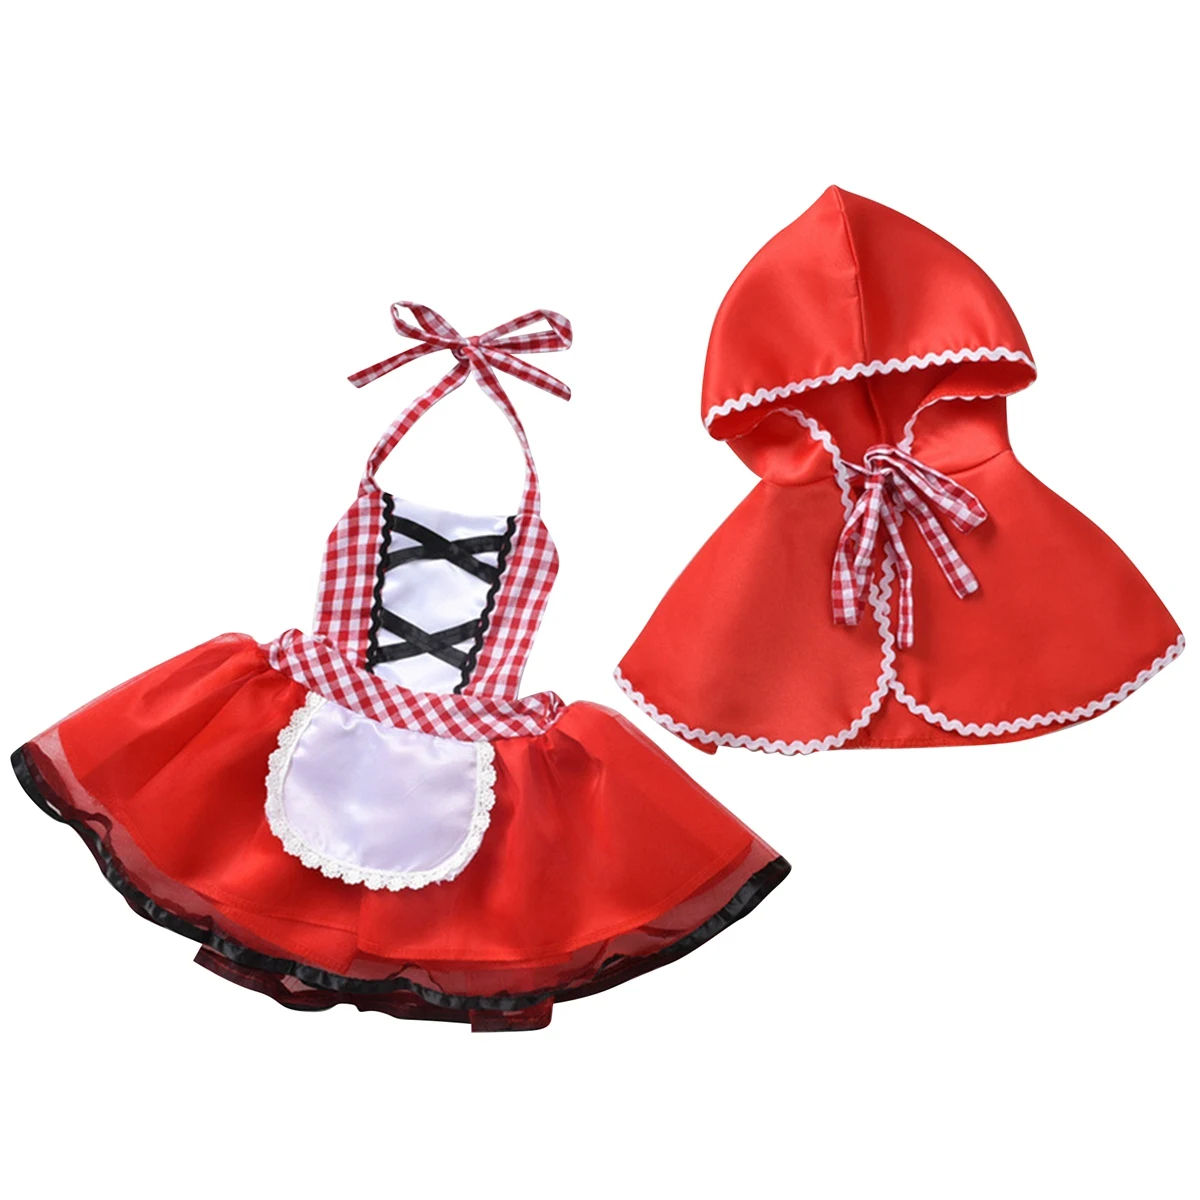 

Newborn Toddler Baby Girls Halter Romper Dress Red Cloak Little Red Hood Outfits Party Cosplay Costume,70